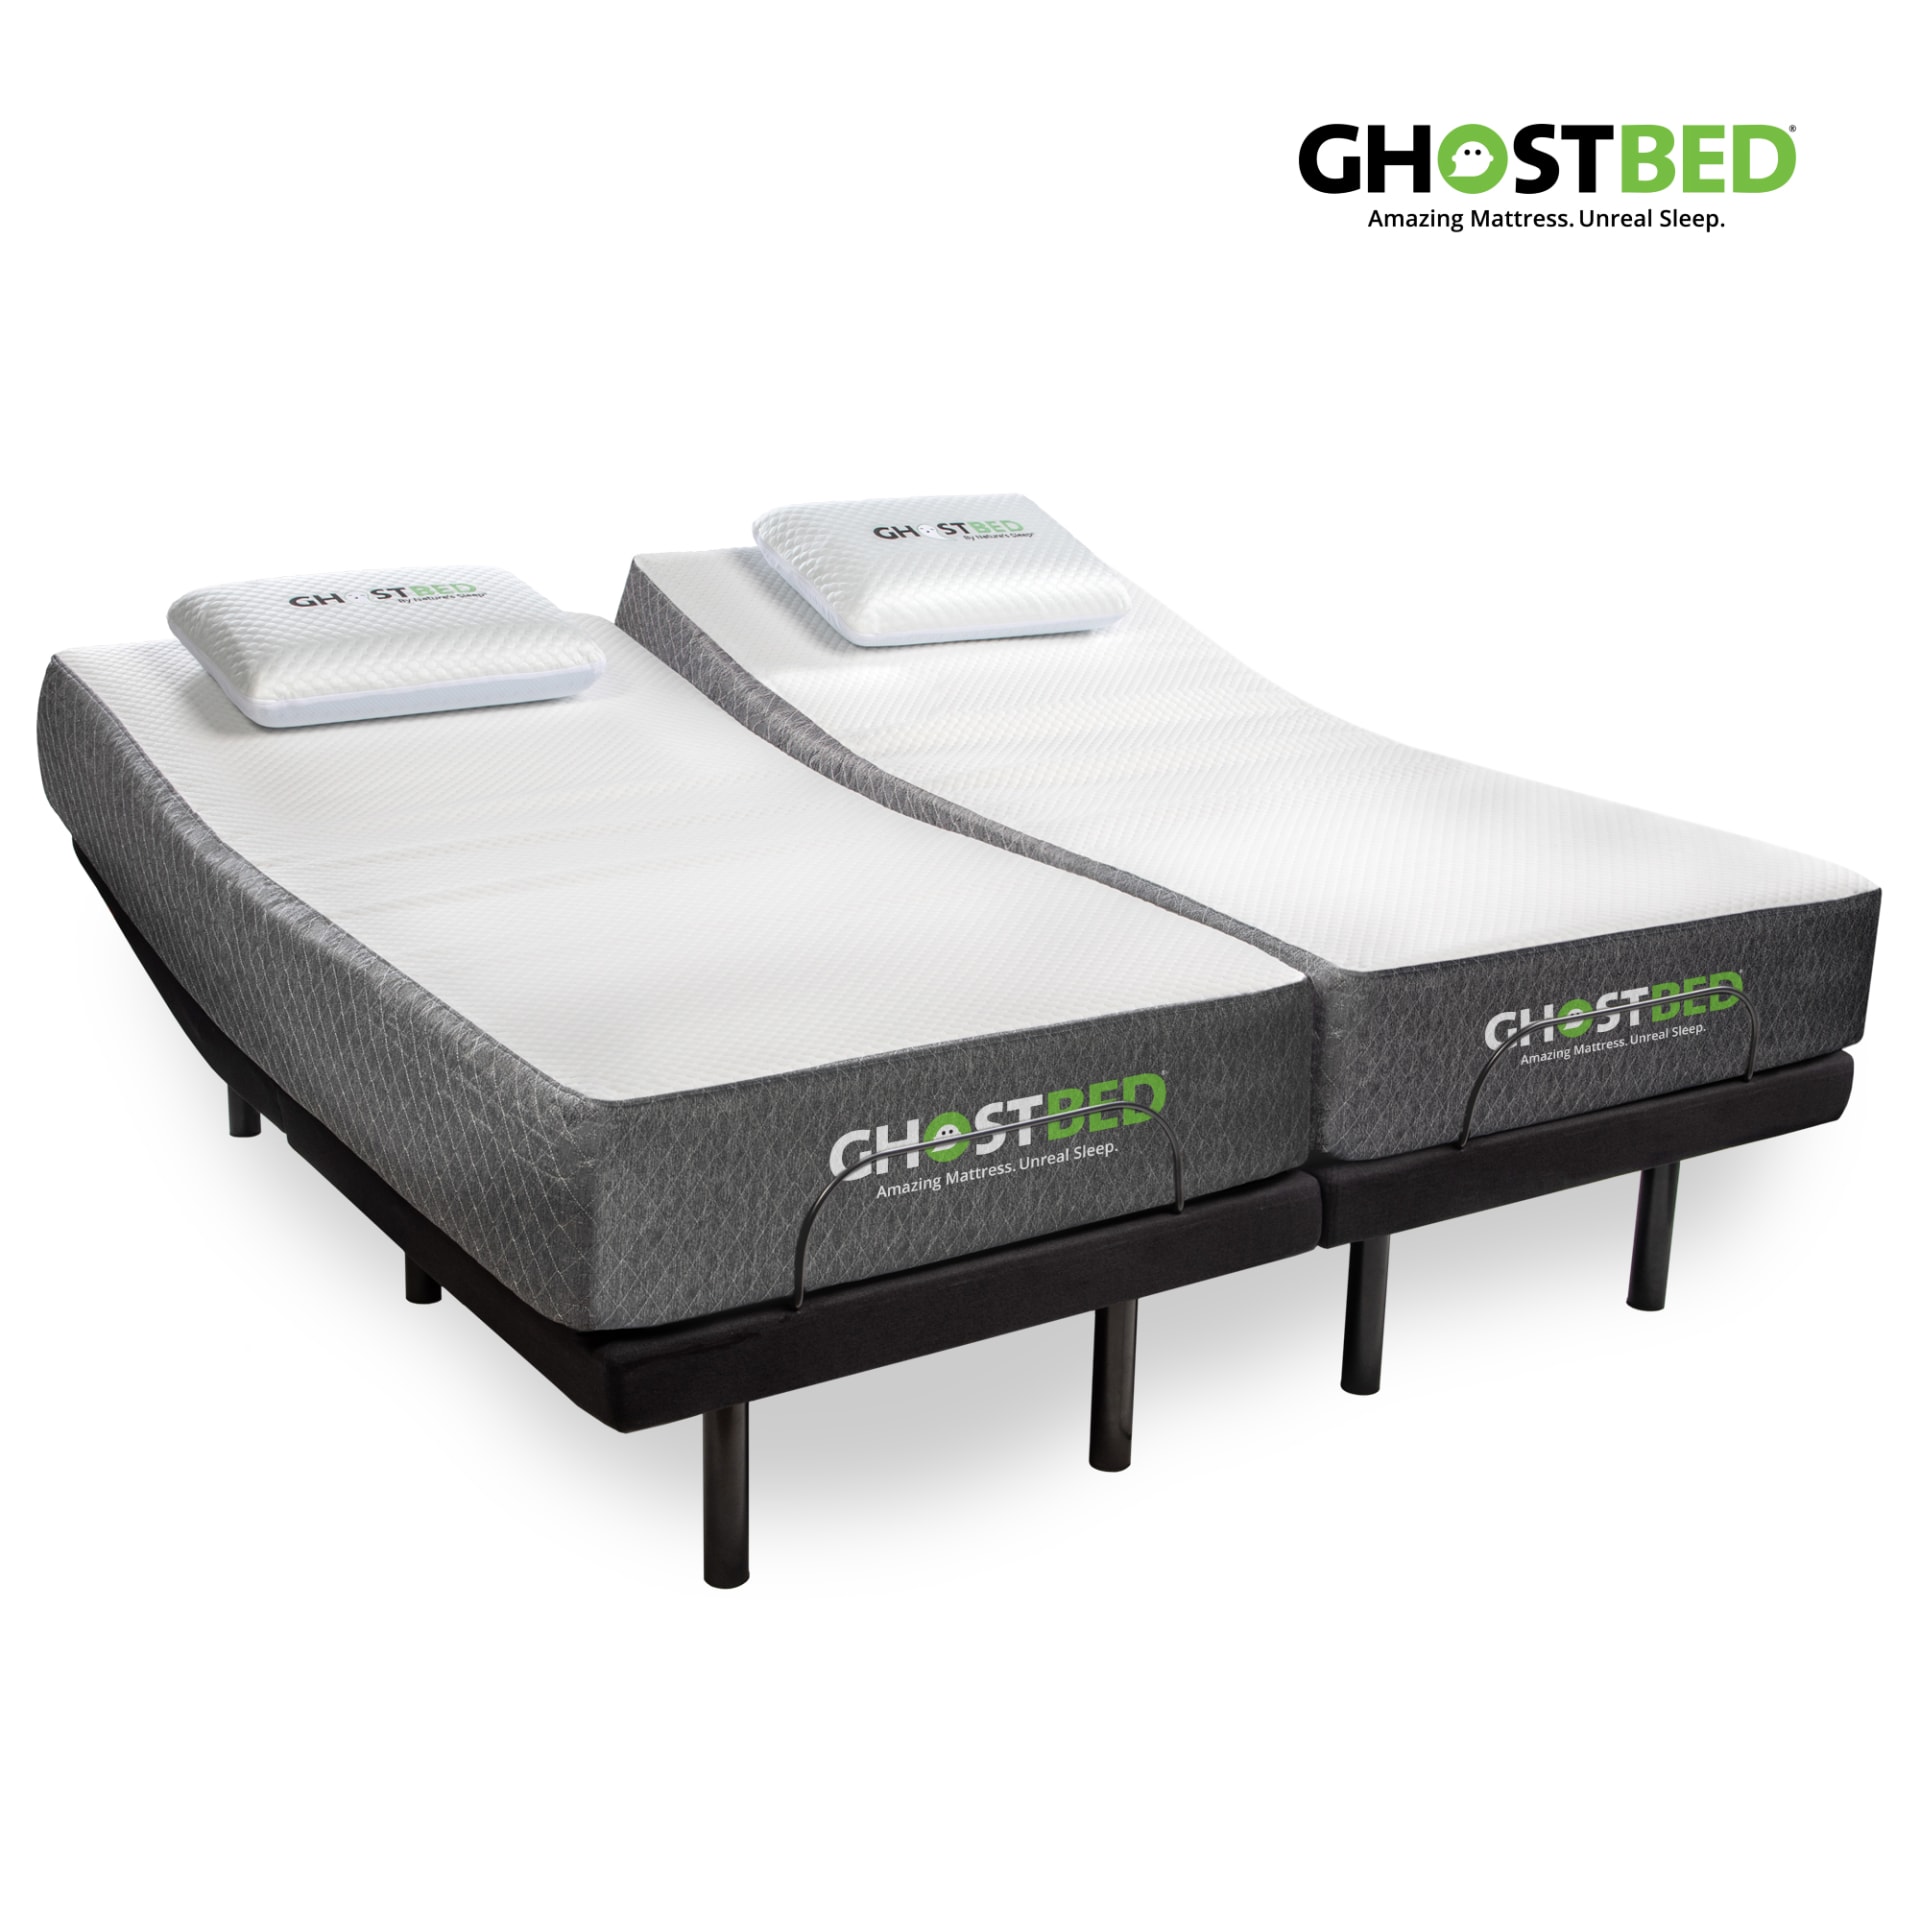 Ghostbed 11 Memory Foam Mattress With, How To Move A Tempurpedic Adjustable Bed Frame